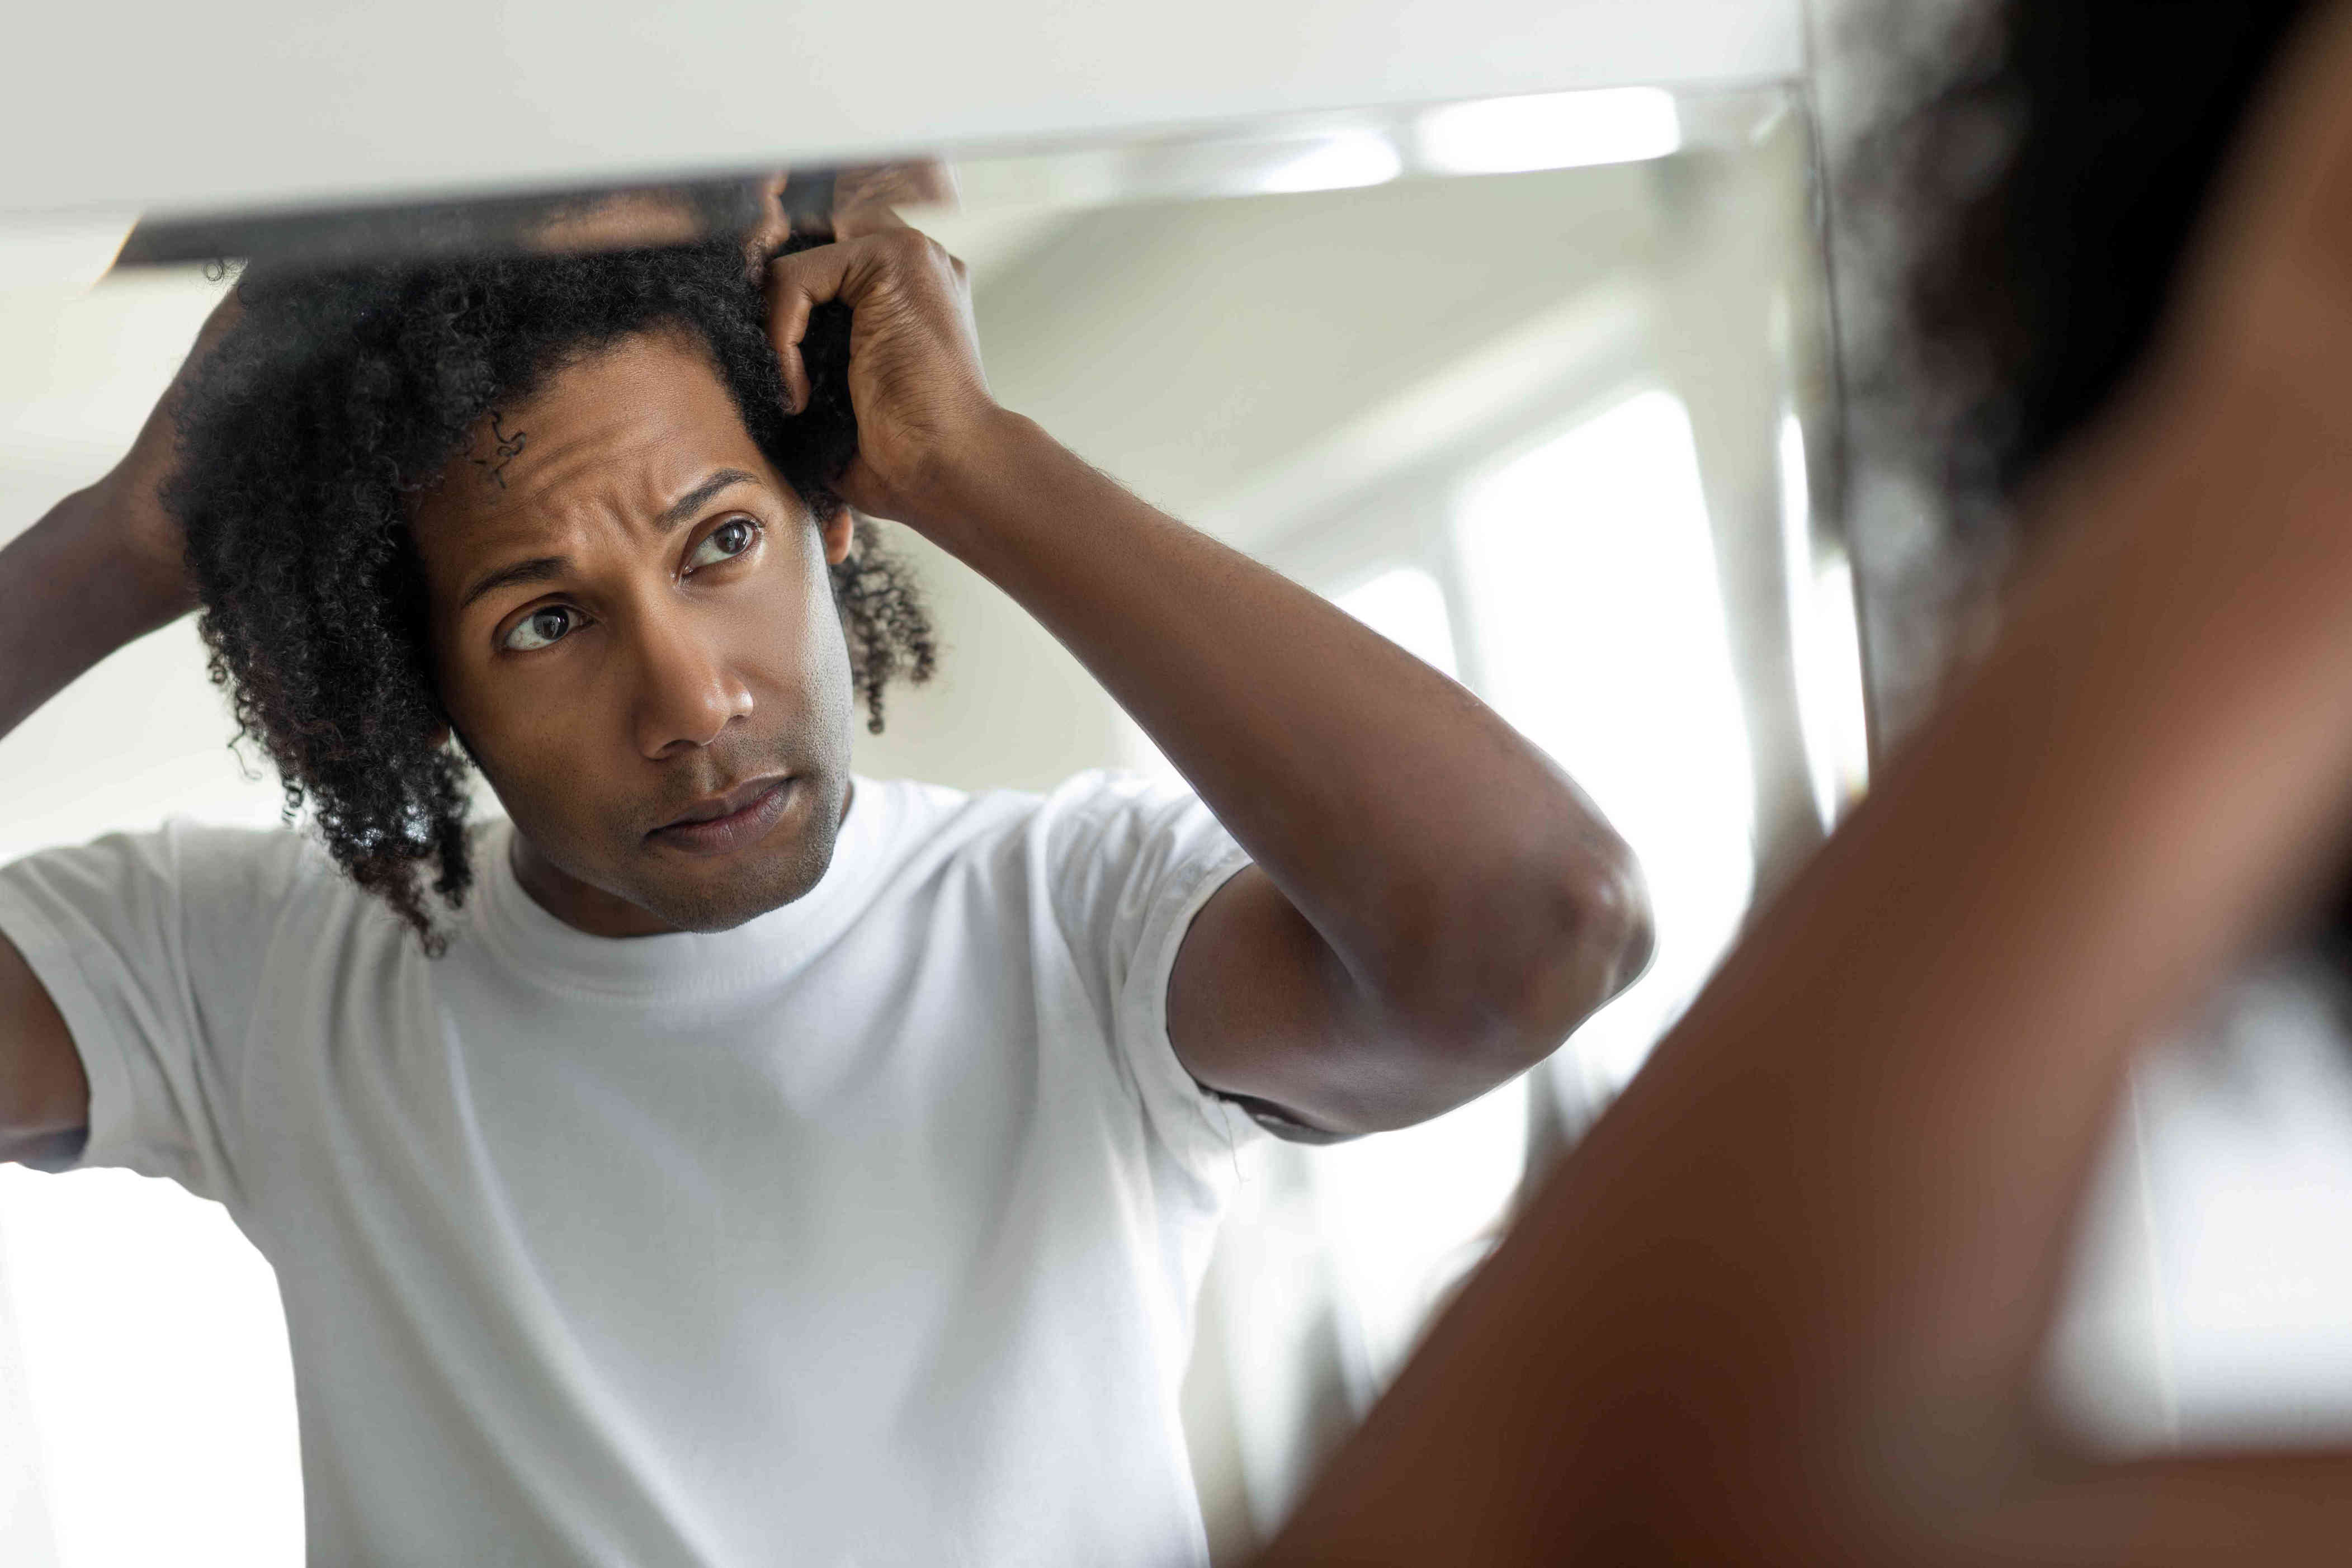 which vitamin deficiency causes hair loss?